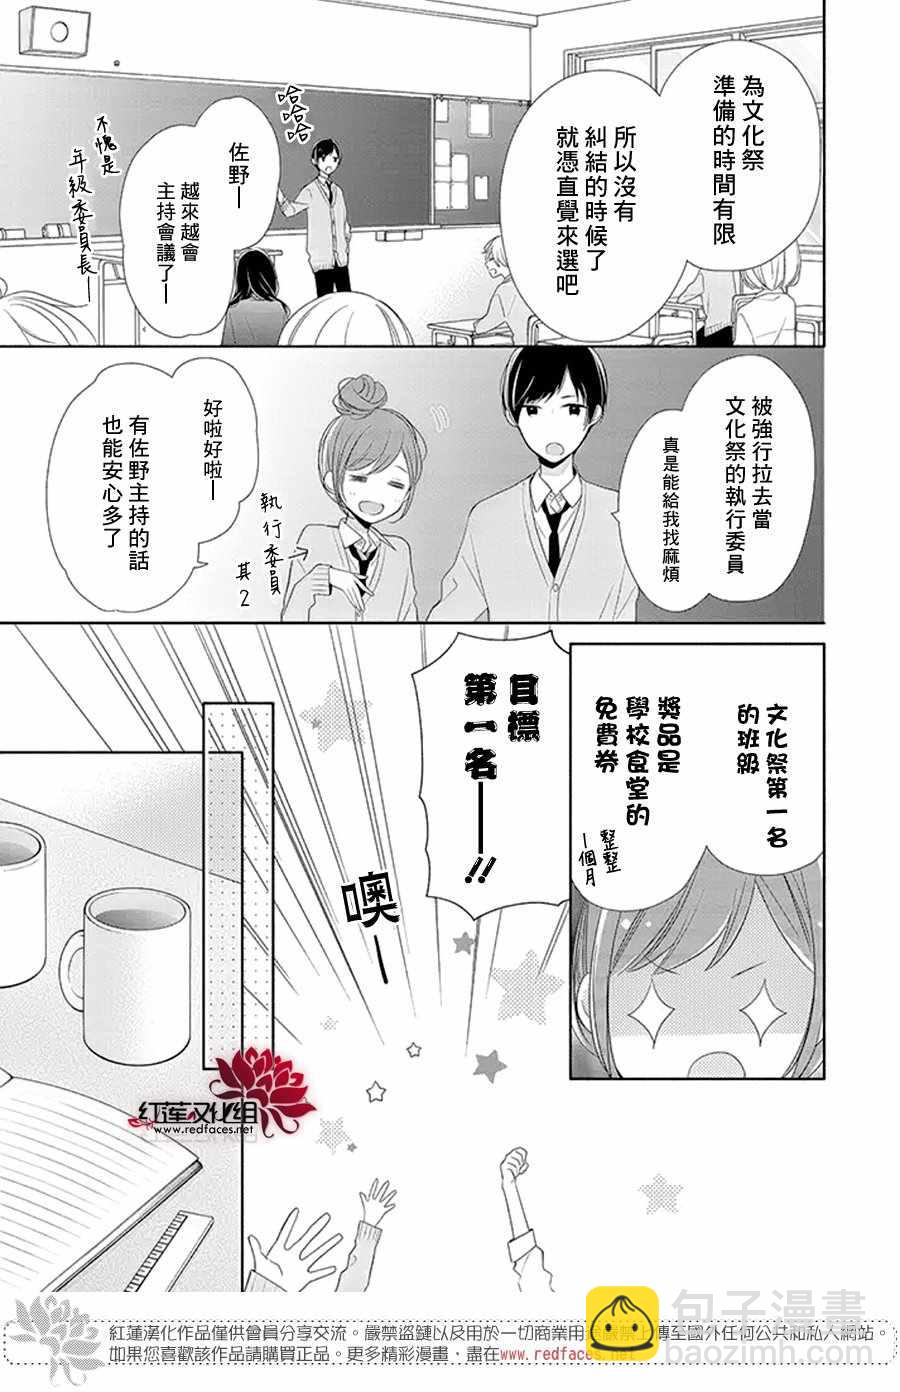 If given a second chance - 15話 - 3